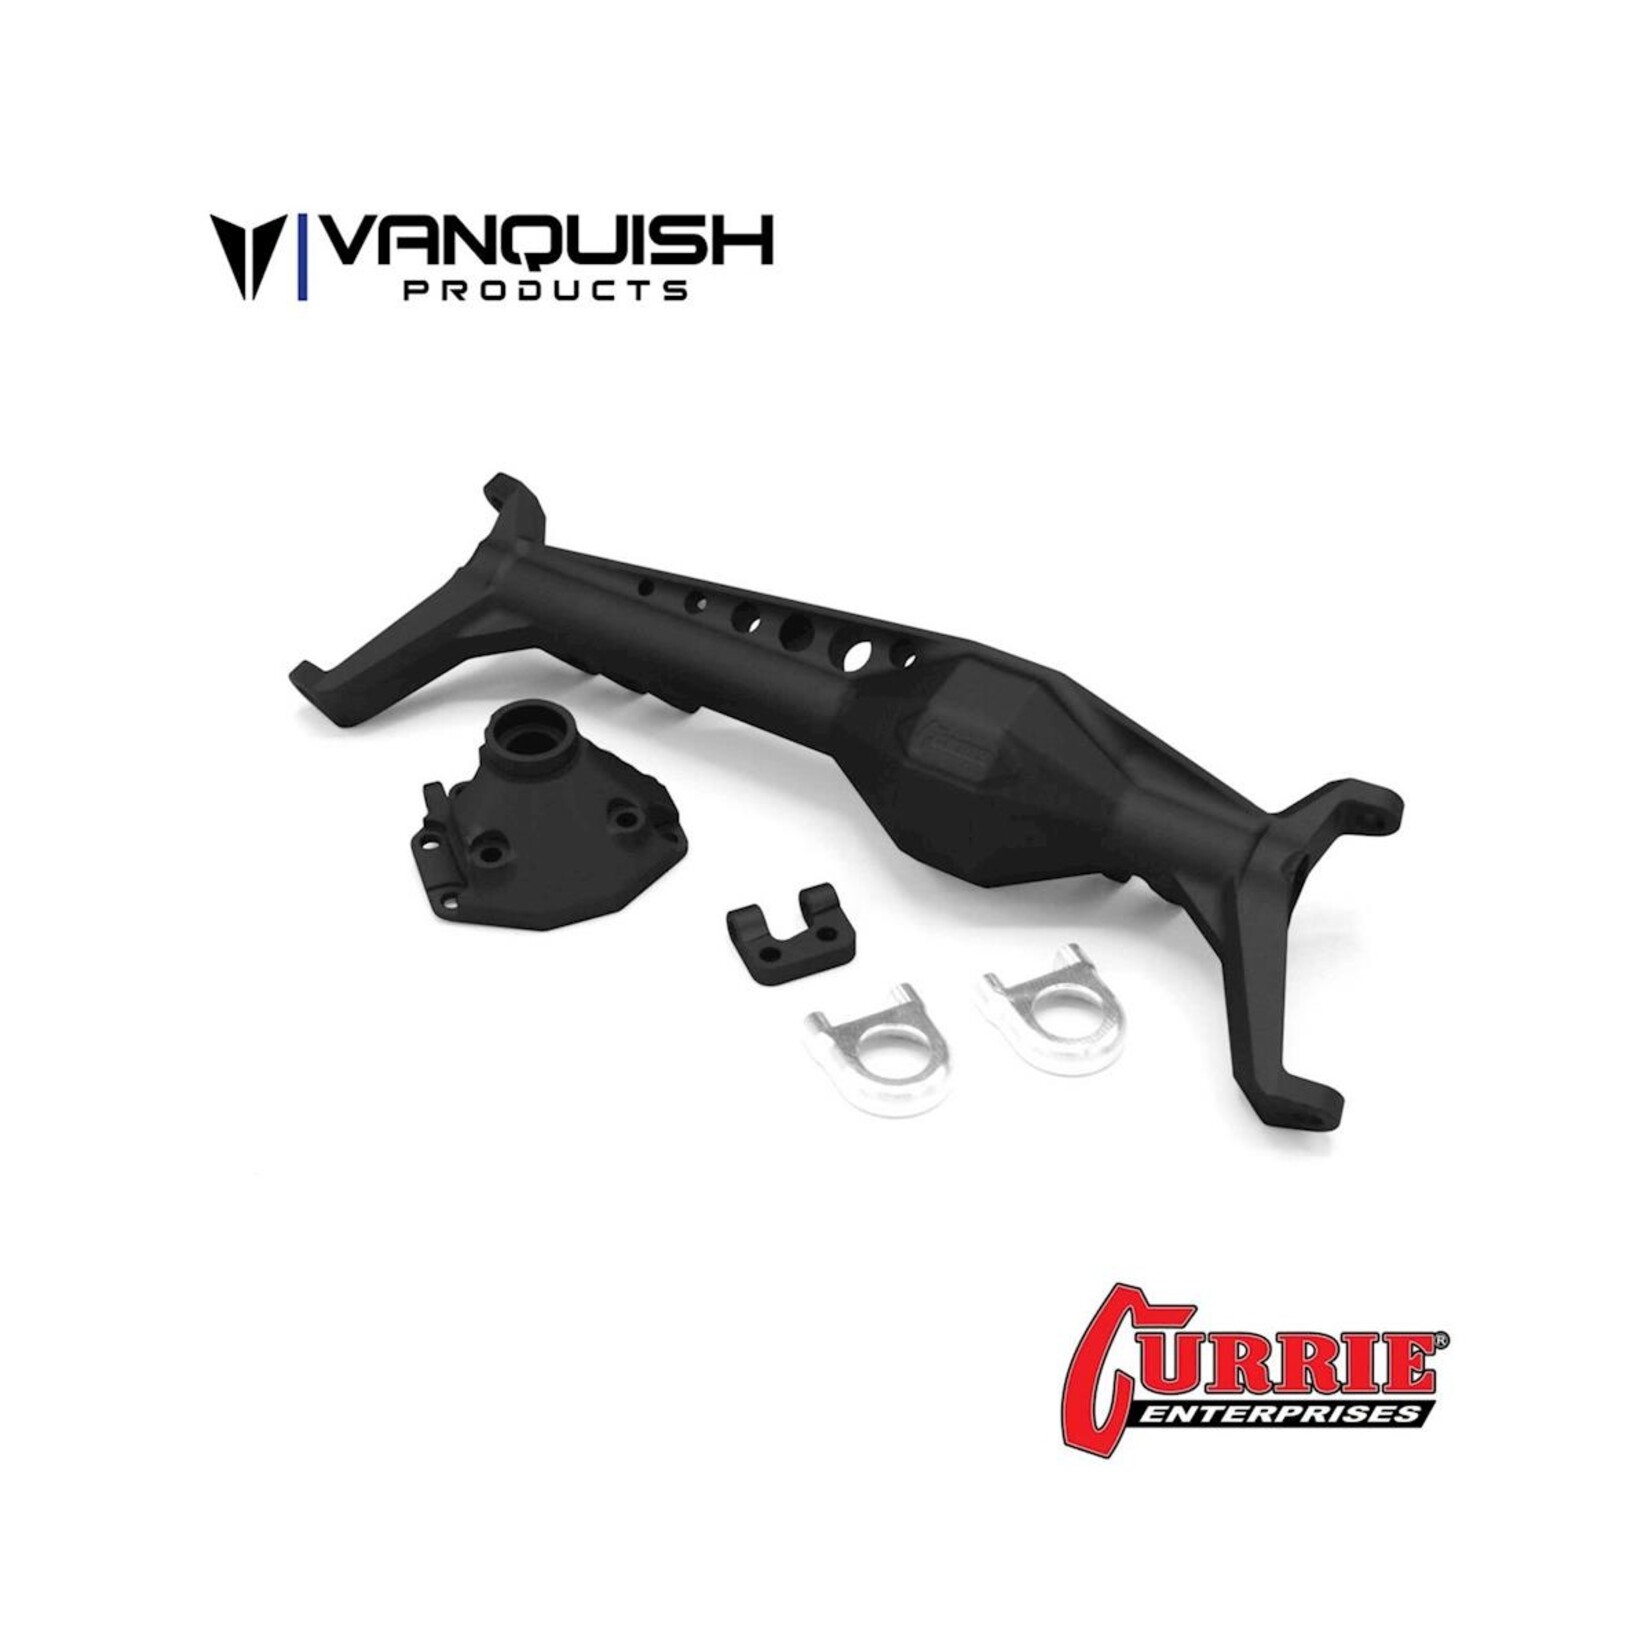 Vanquish Products Vanquish Products Axial Capra Currie F9 Front Axle (Black) #VPS08470